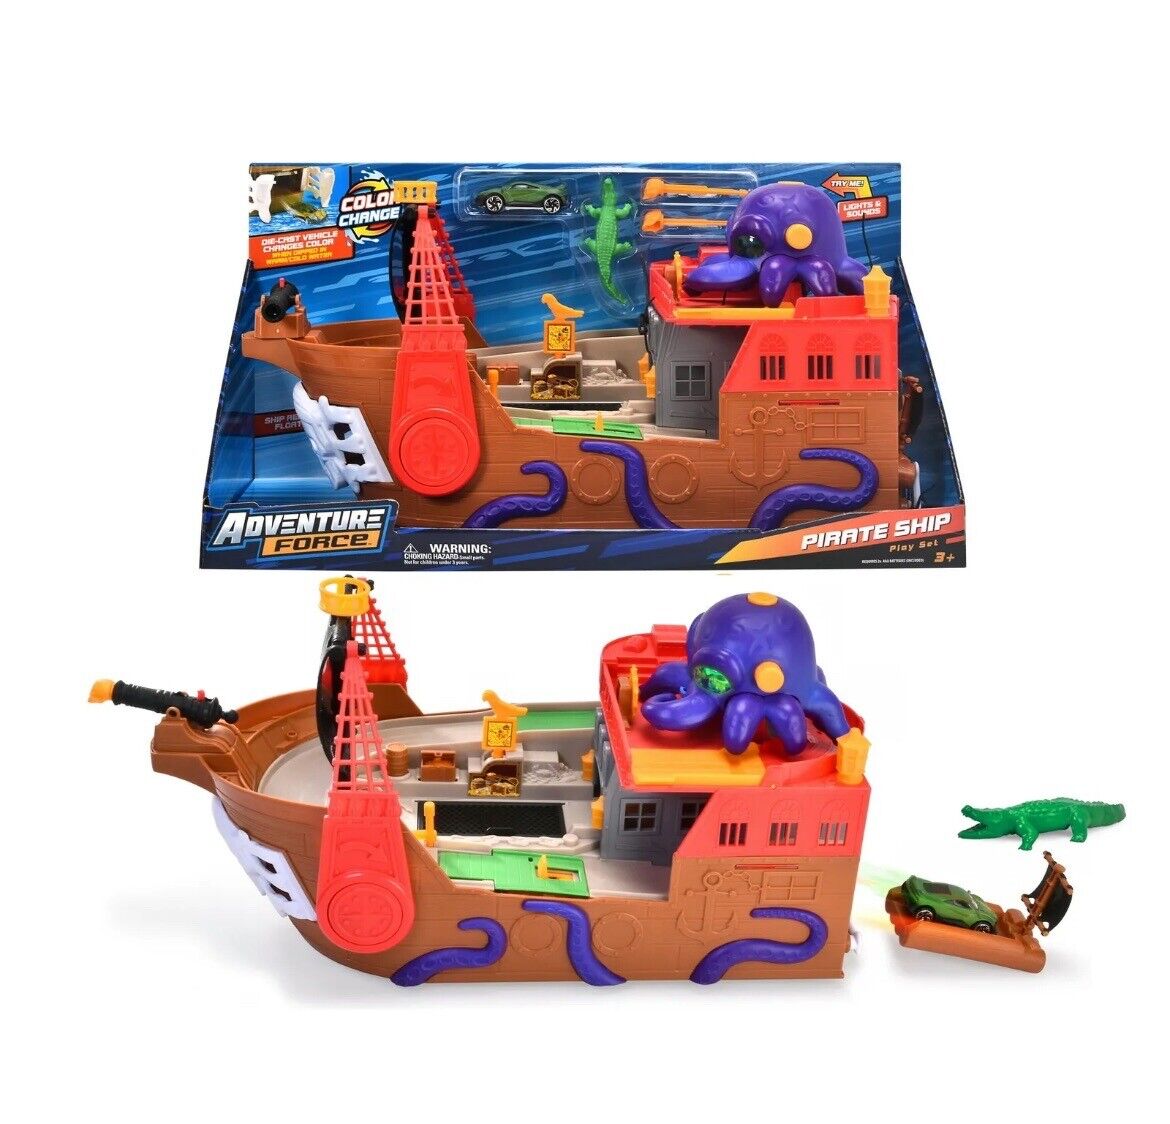 Adventure Force Pirate Ship Die-Cast Vehicle Playset, Multi-Color, Color Change Adventure Force Does not apply